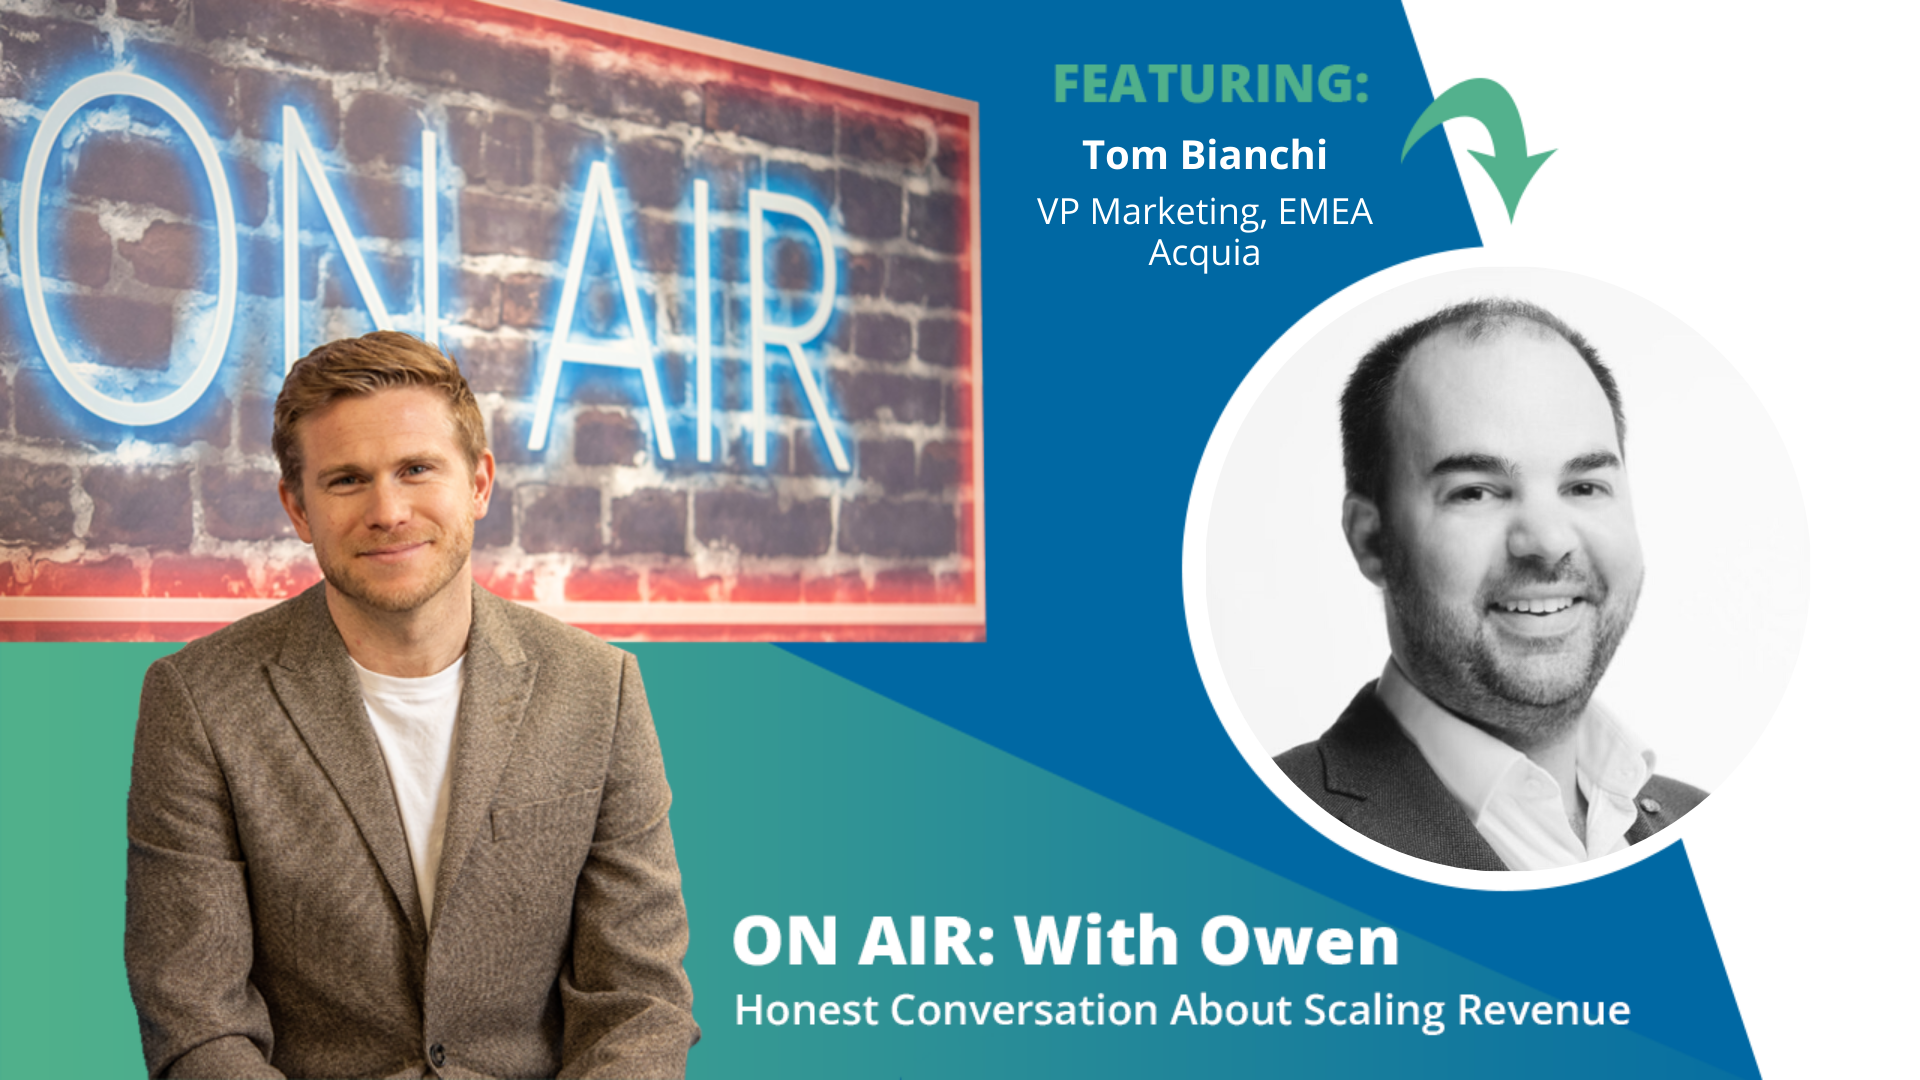 ON AIR: With Owen Episode 56 Featuring Tom Bianchi – VP of Marketing for EMEA, Acquia